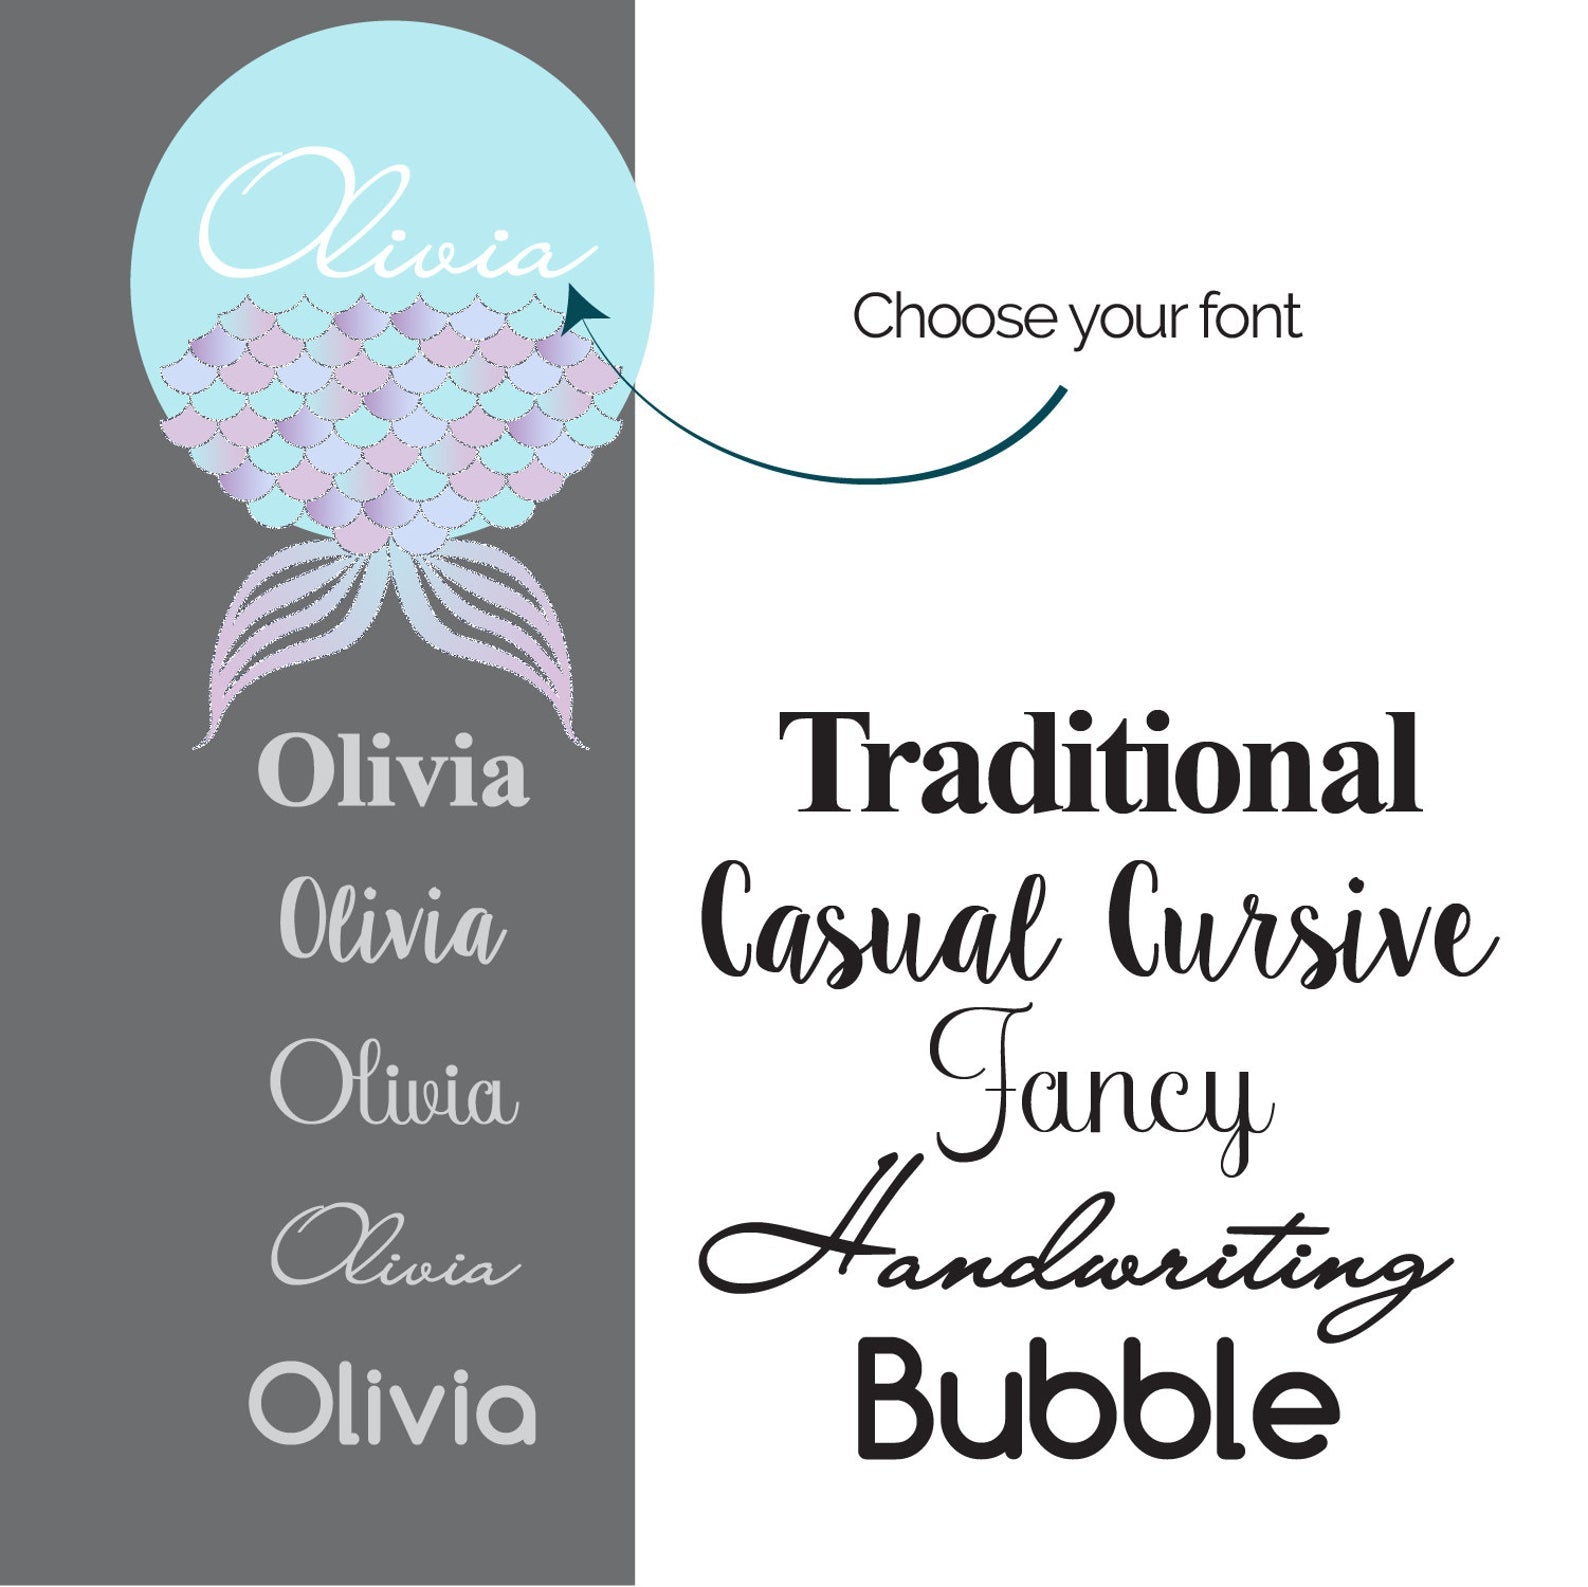 Personalized Mermaid Tail Name Wall Decal Sticker | Turquoise and Lavender - Picture Perfect Decals